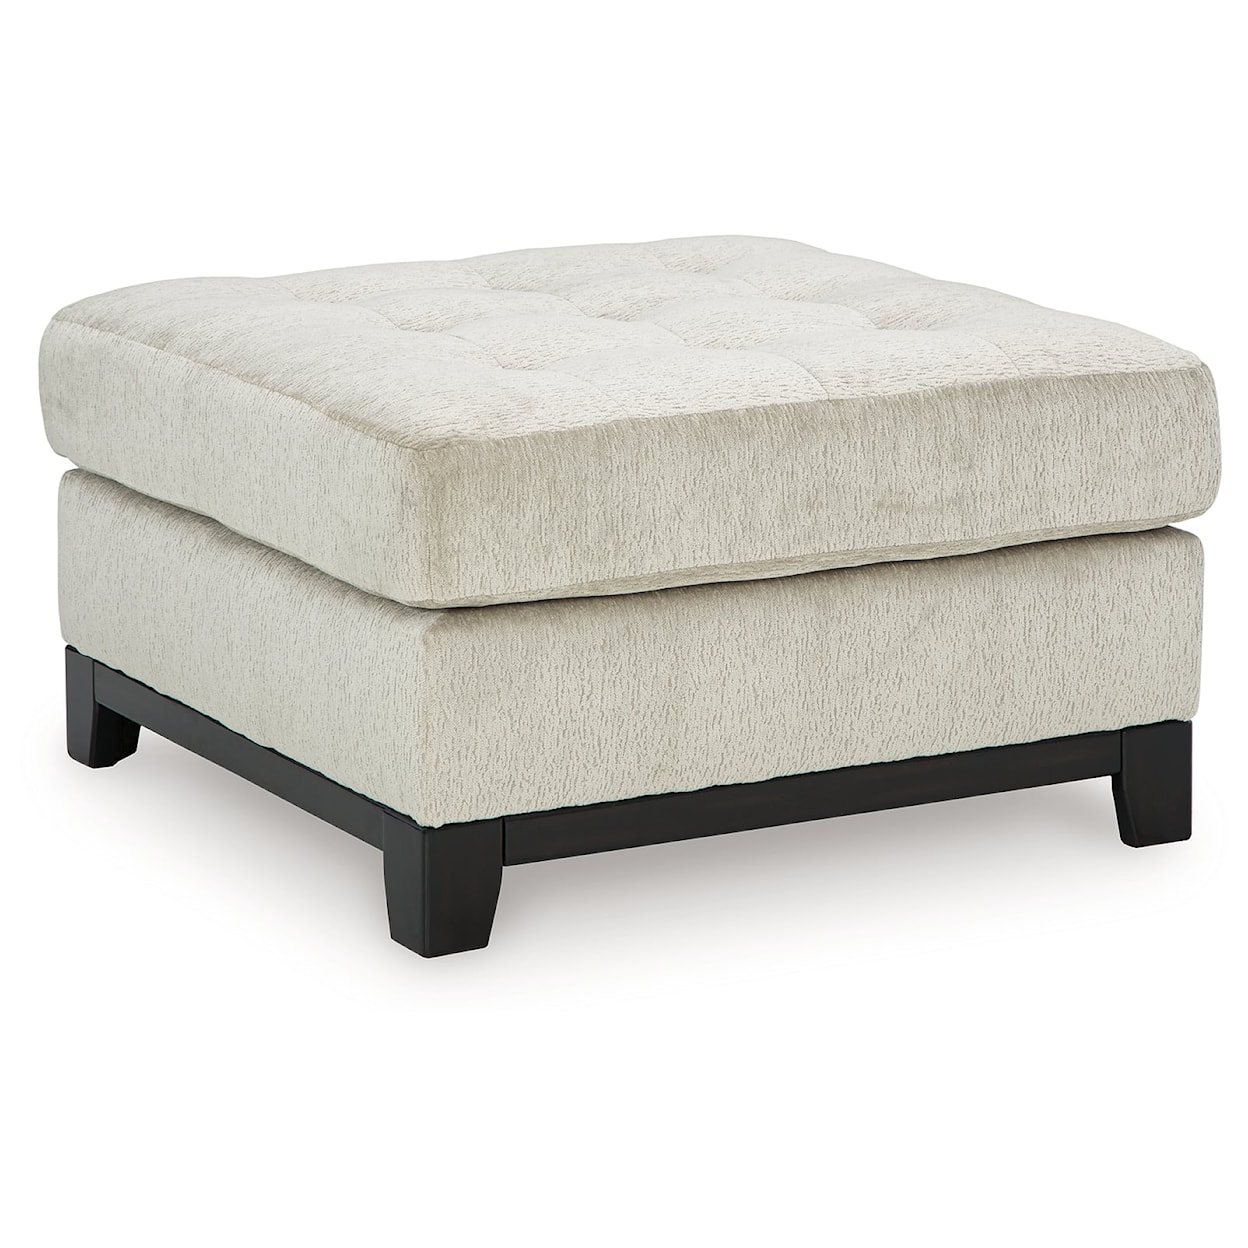 Ashley Furniture Benchcraft Maxon Place Oversized Accent Ottoman